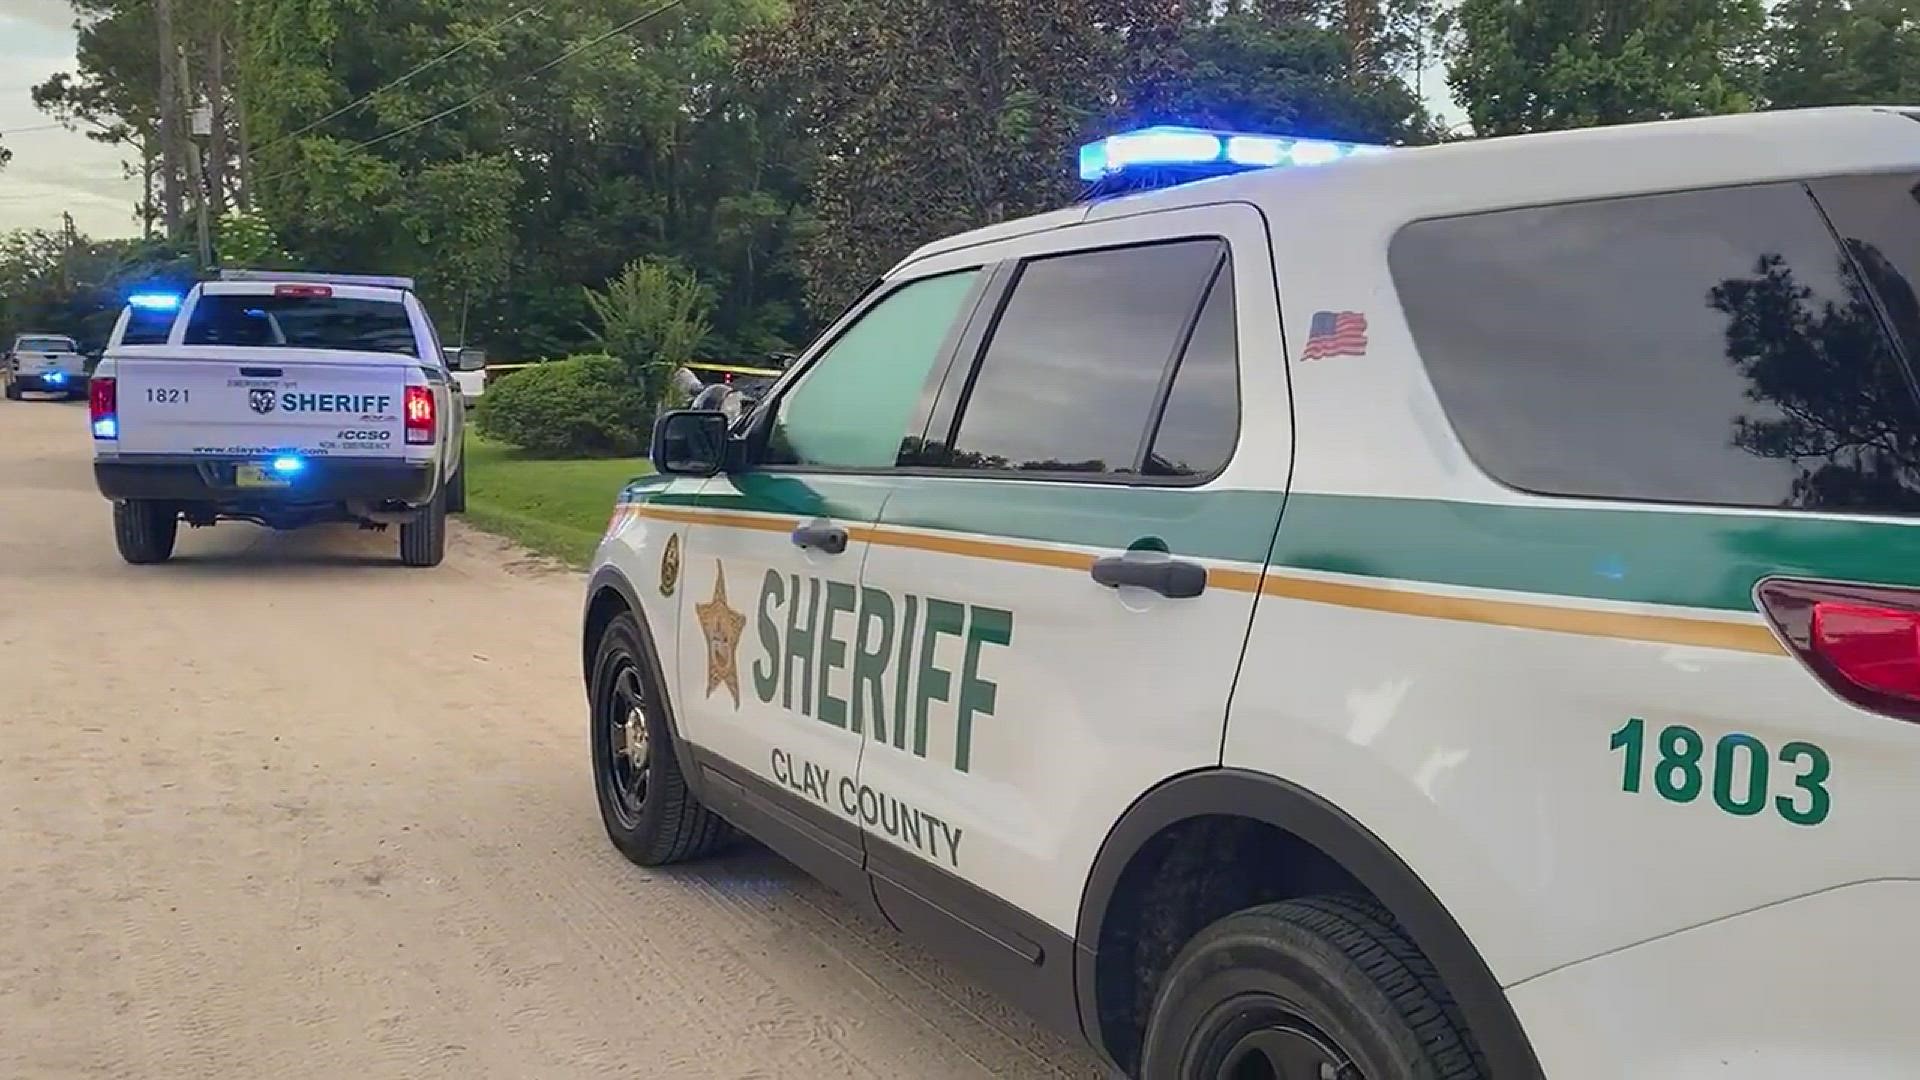 One person is dead following a shooting incident in Green Cove Springs Friday evening, according to the Clay County Sheriff's Office.